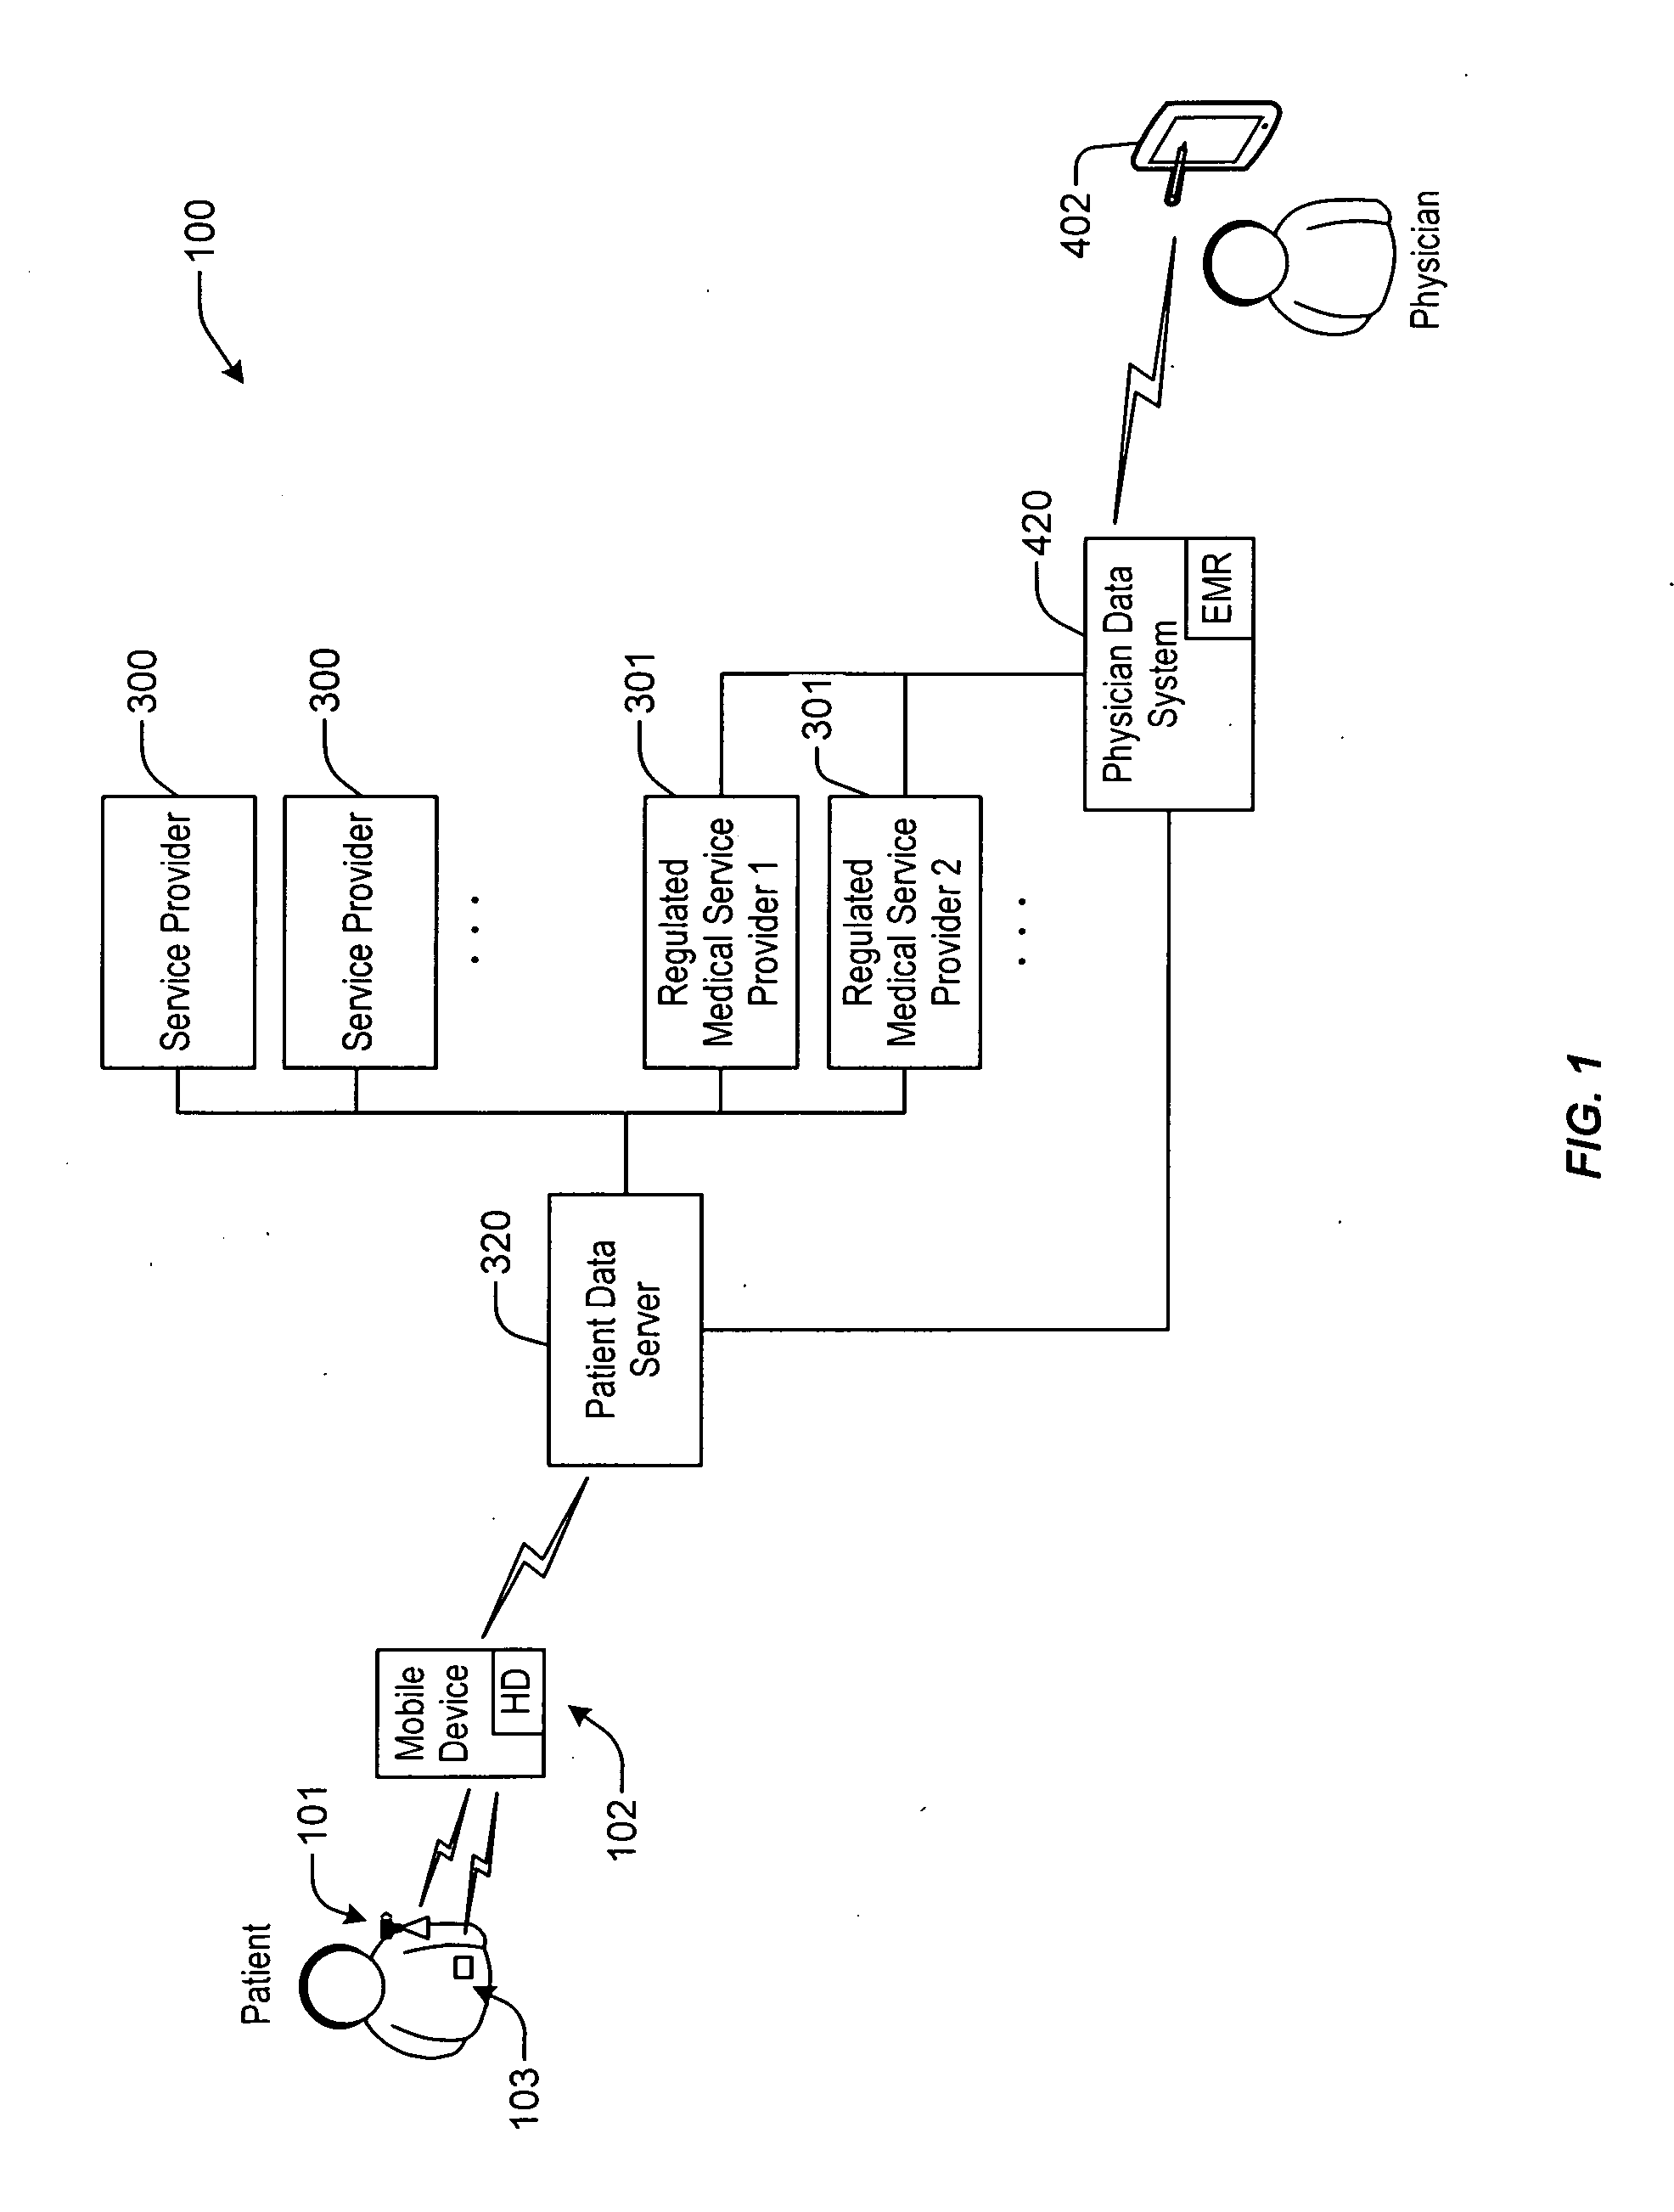 Methods of treatment and diagnosis using enhanced patient physician communication